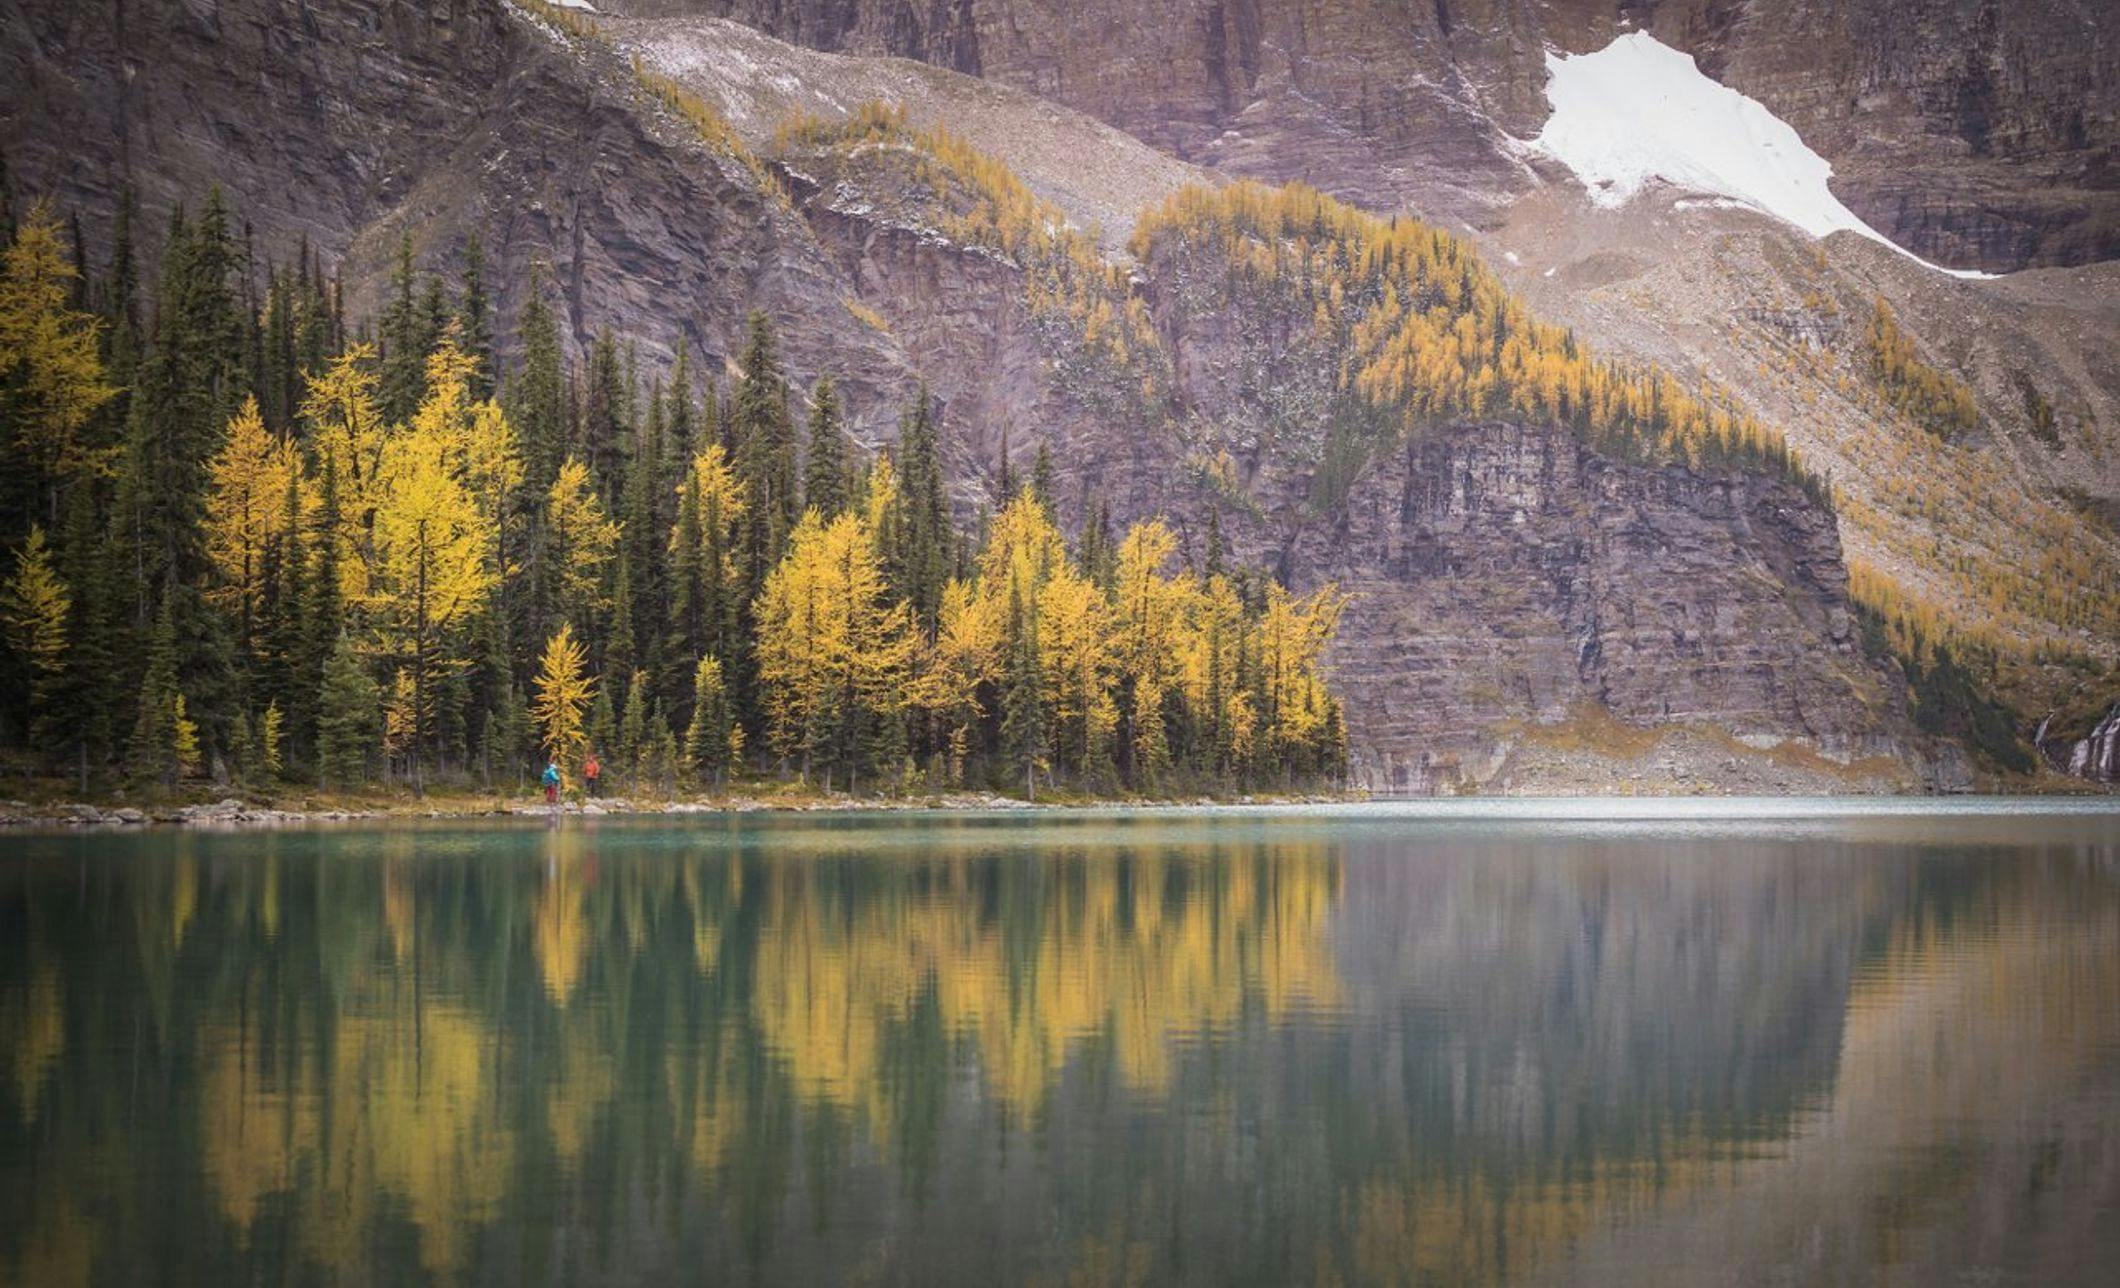 Larches reflect in Taylor lake in Banff National Park in the Canadian Rockies